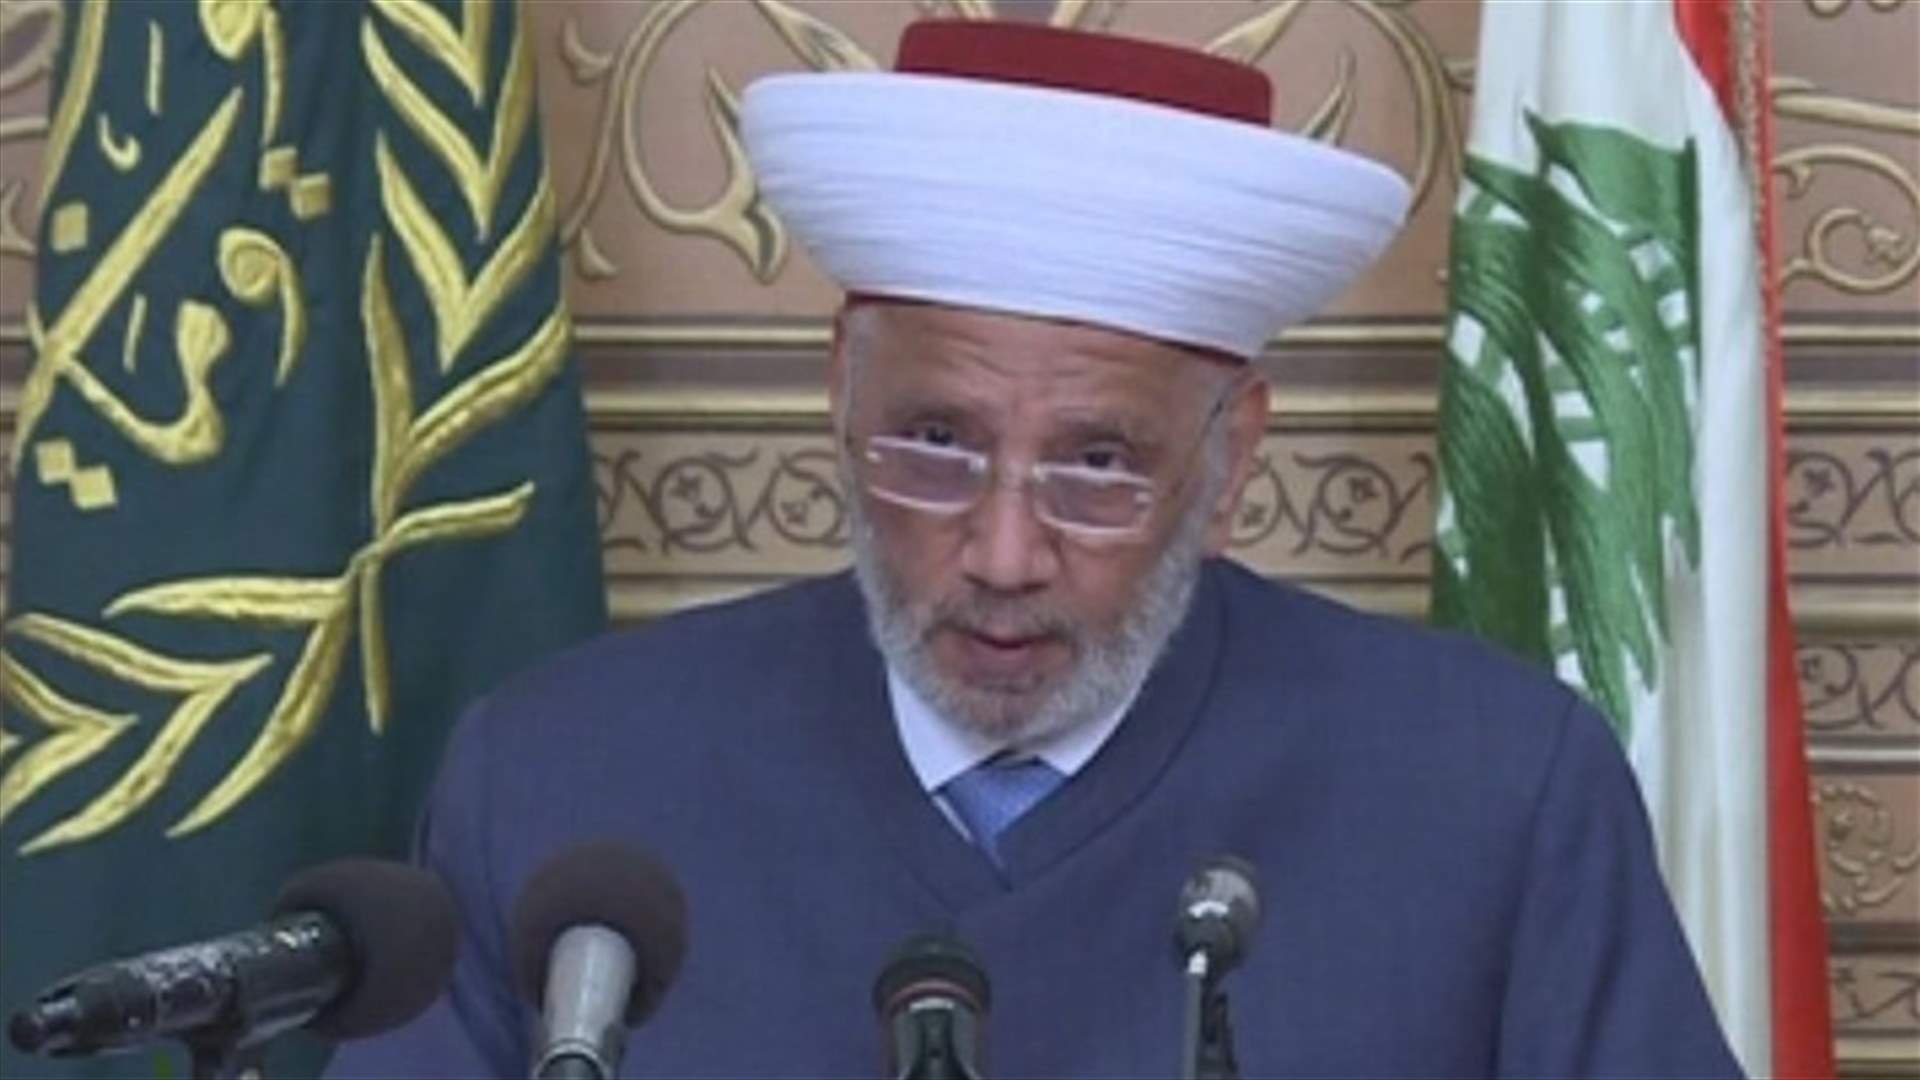 Mufti Darian says parliamentary elections will take place